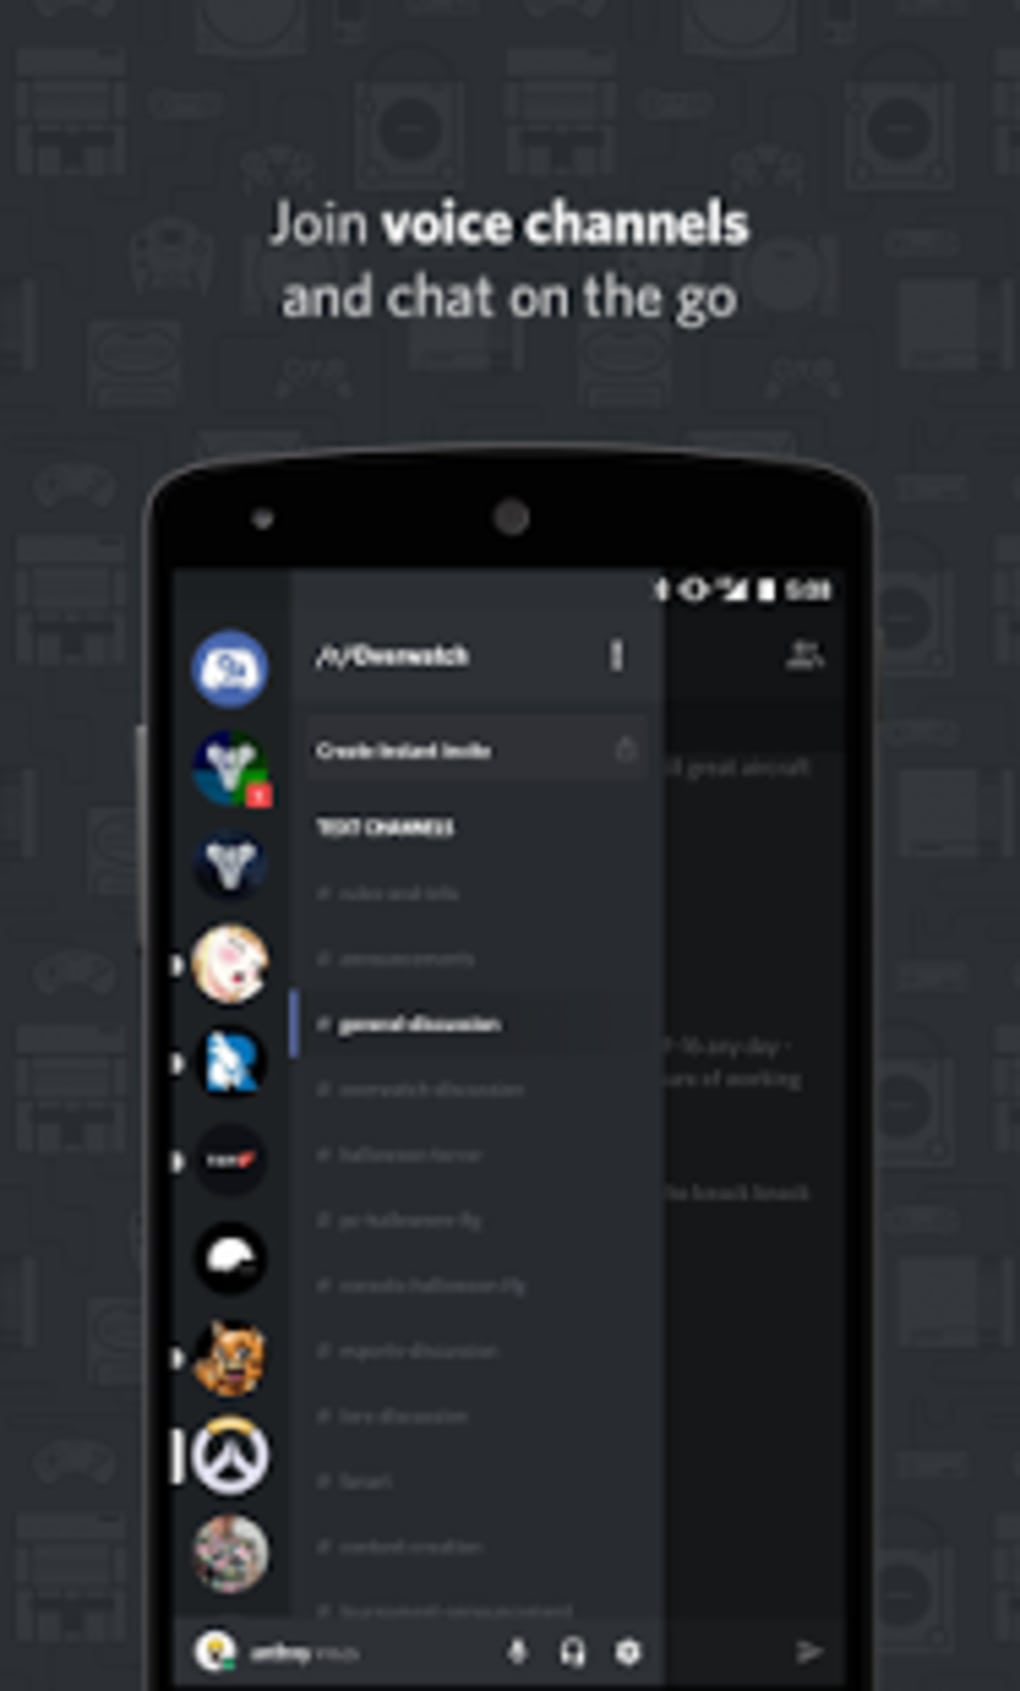 download discord to talk chat and hangout